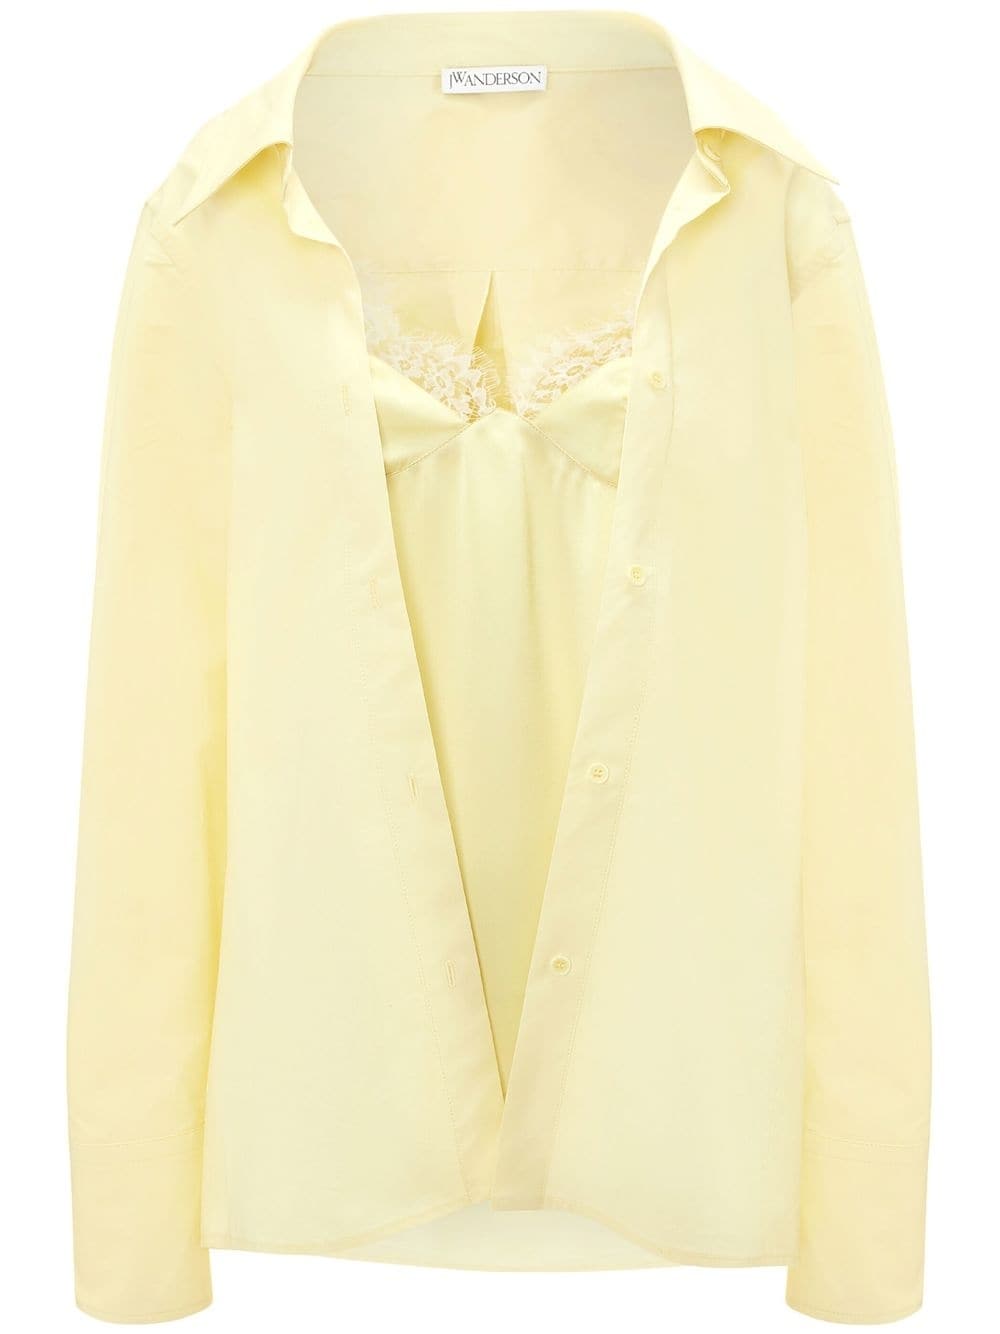 JW Anderson long-sleeved camisole shirt - Yellow